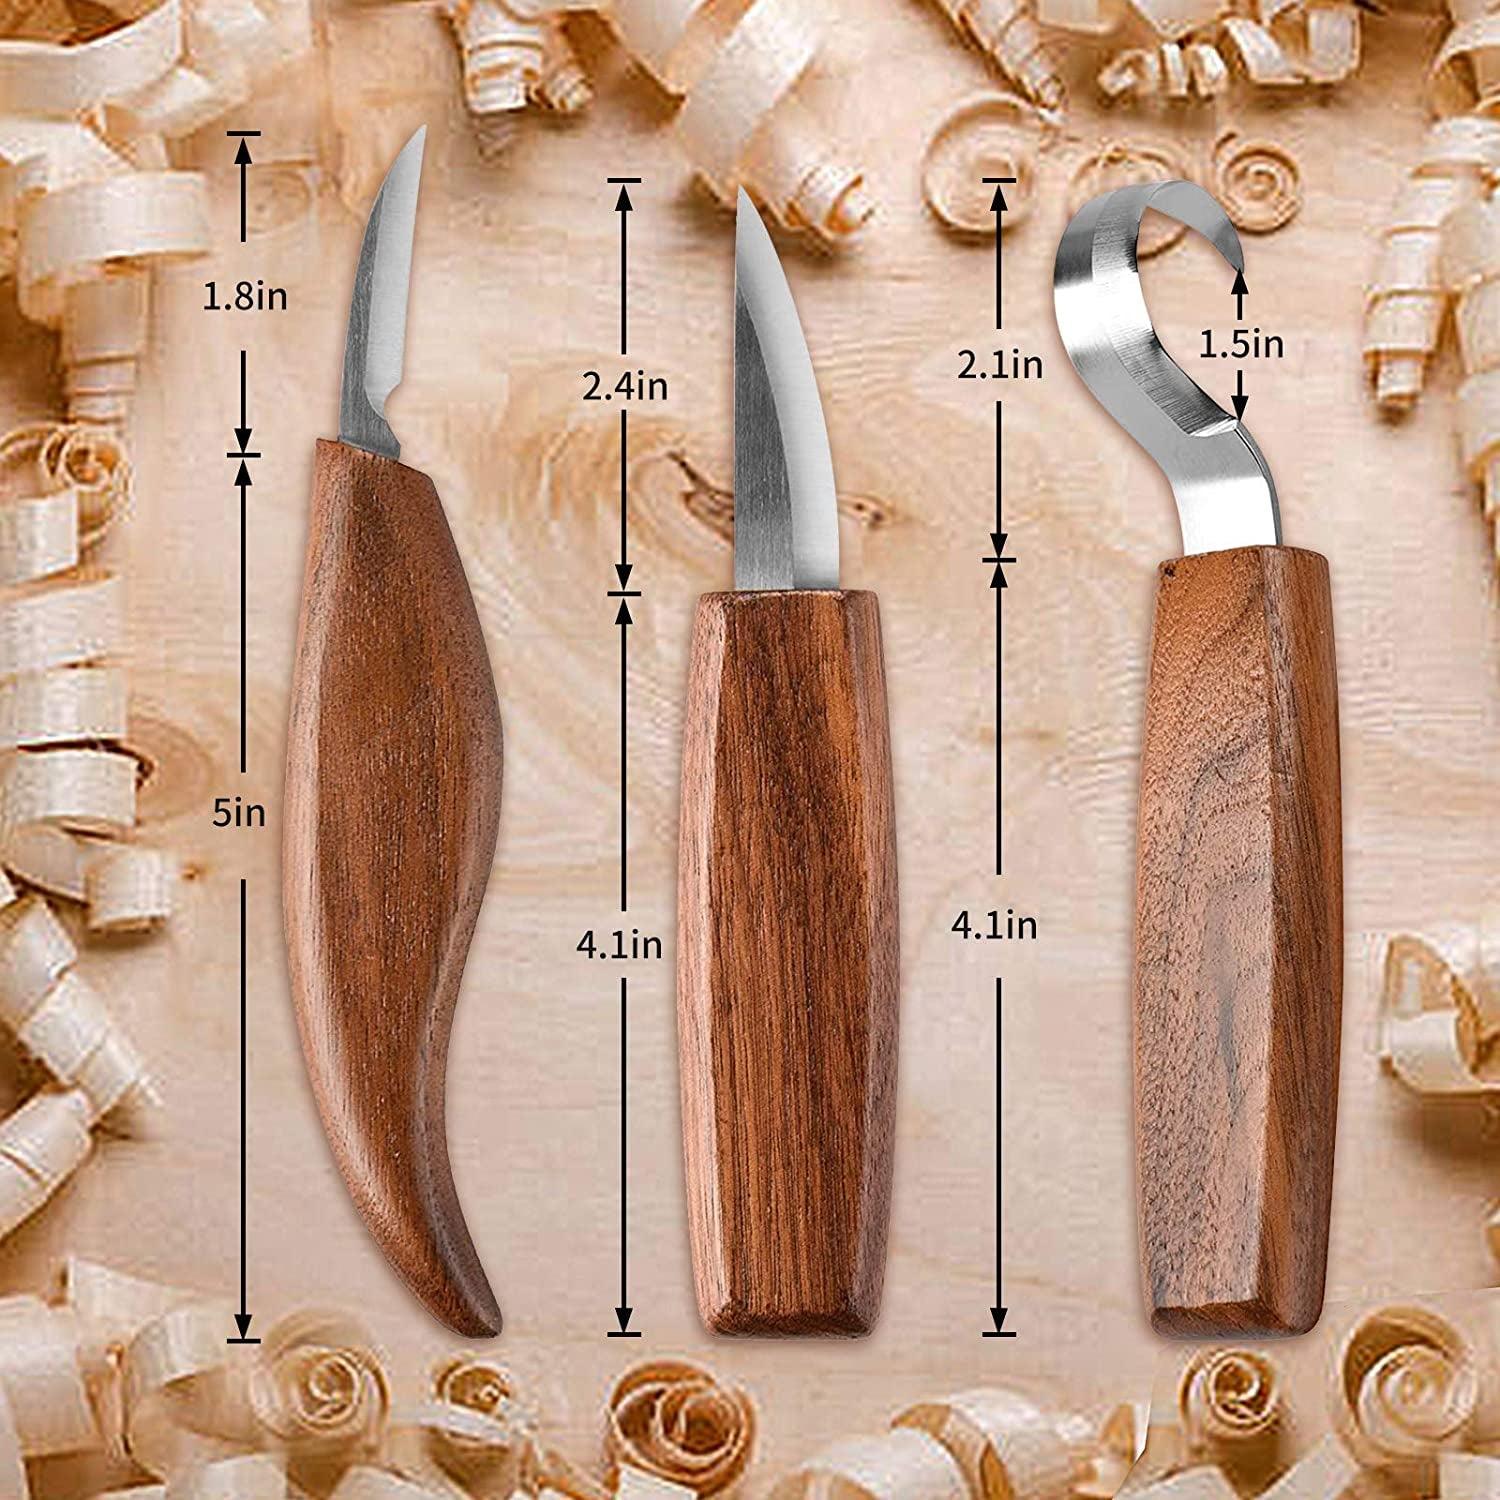 Wood Carving Tools Pack of 11- Includes Black Walnut Handle Wood Carving  Knife,Whittling Knife